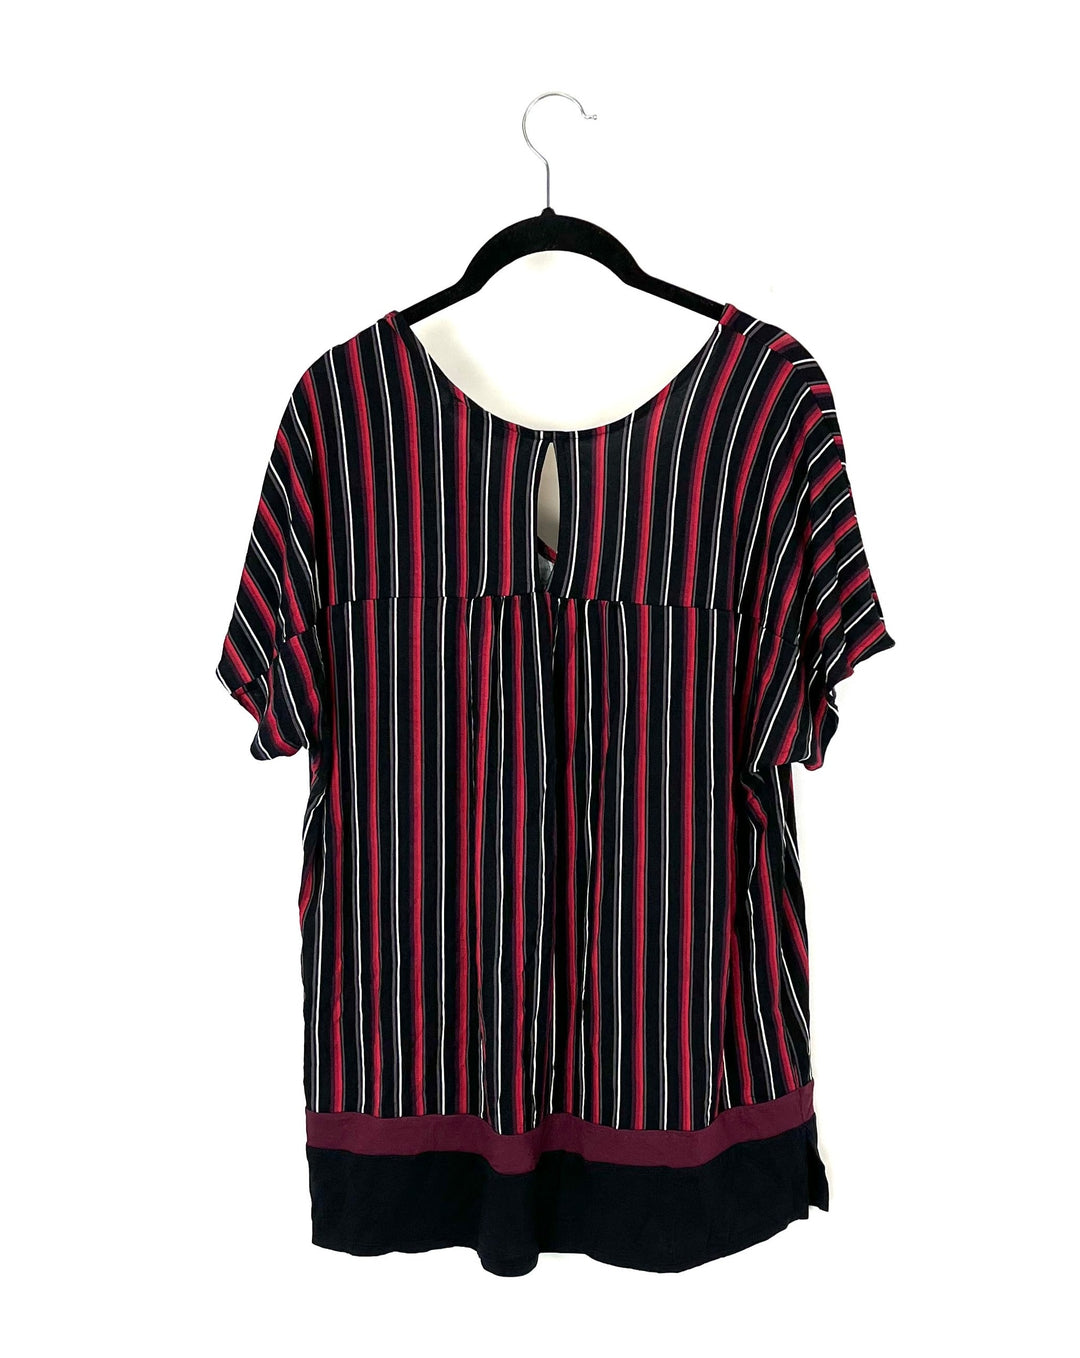 Black and Red Striped Sleepwear Set - Small